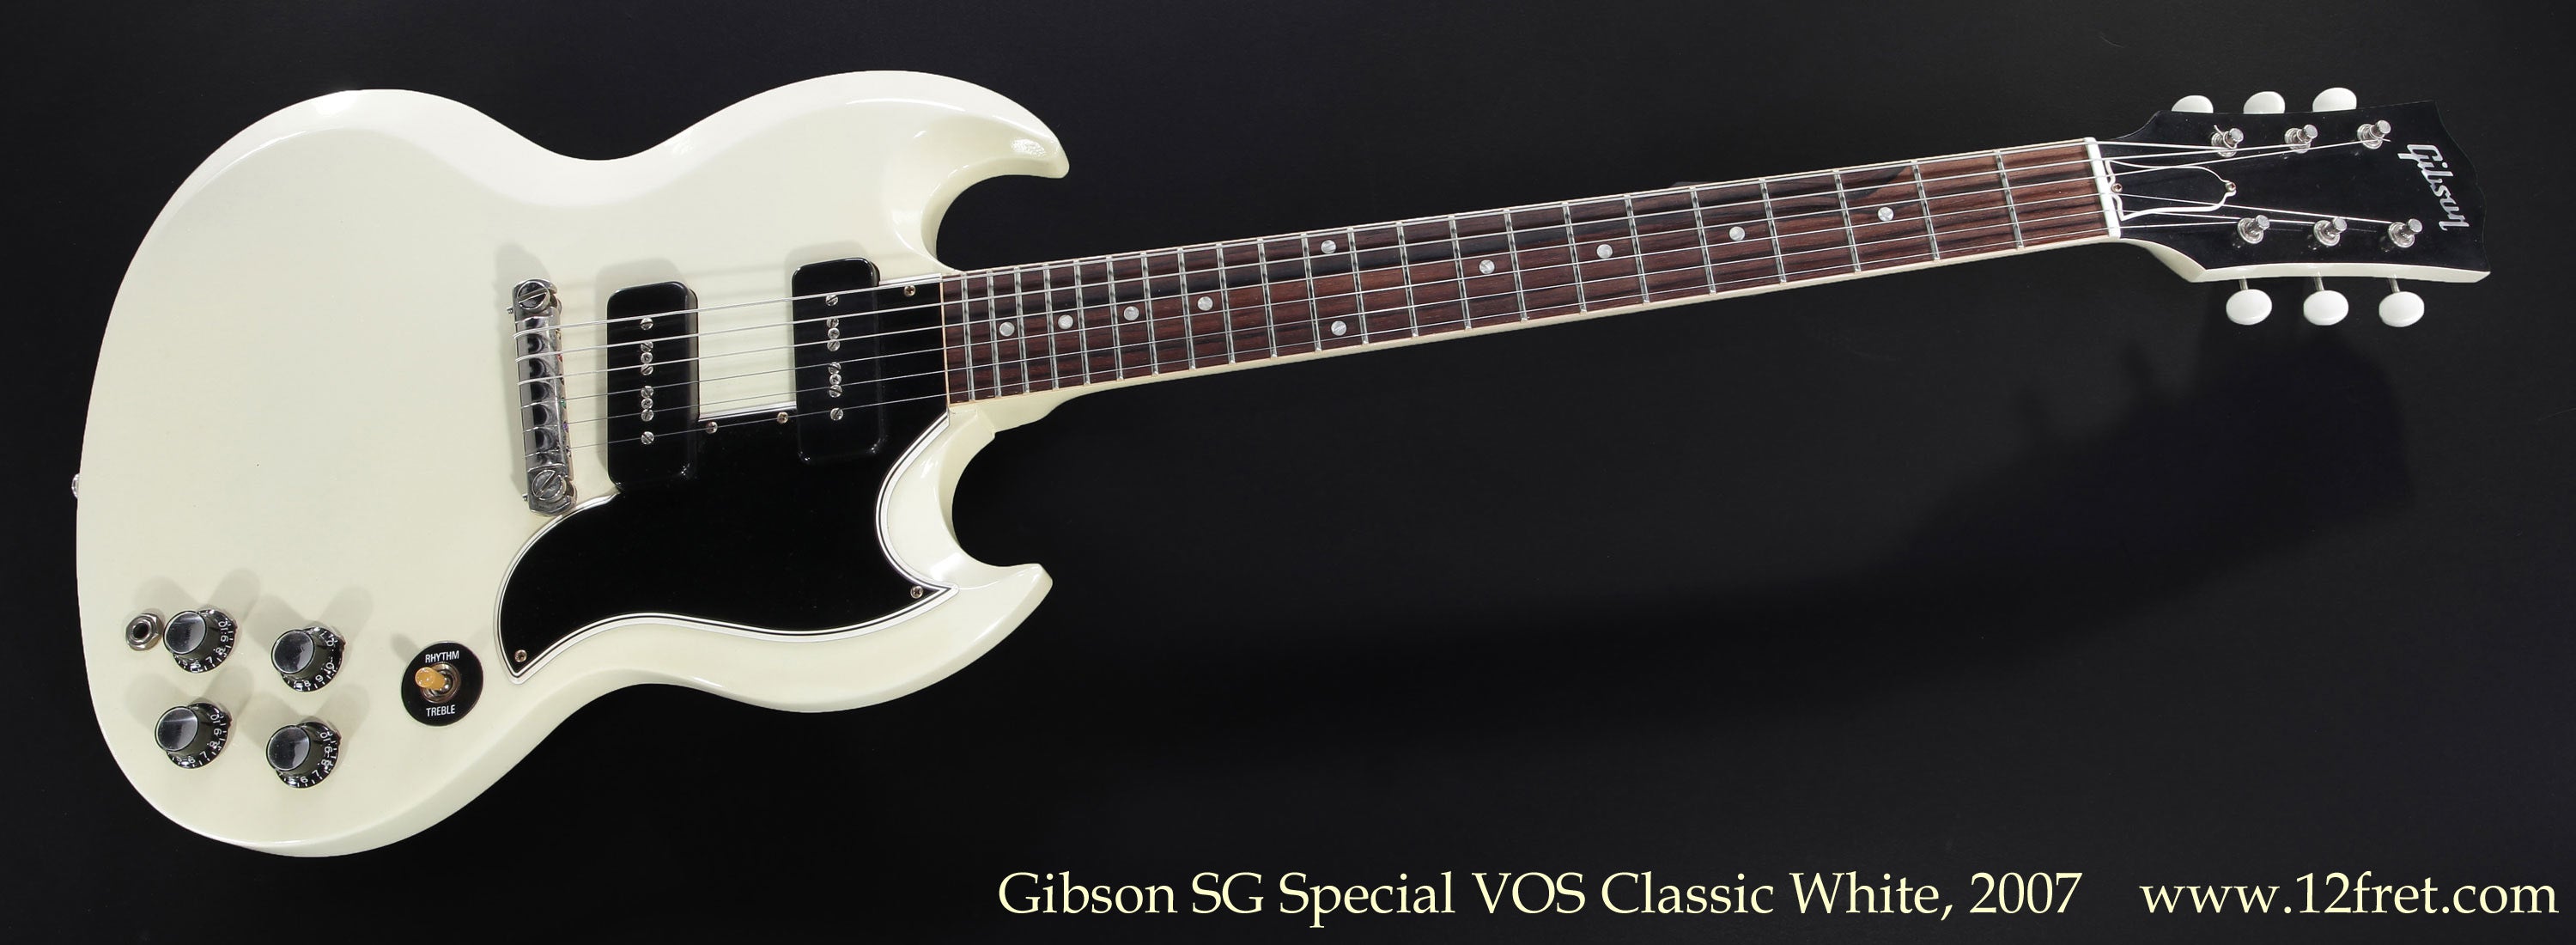 Gibson SG Special VOS Classic White, 2007